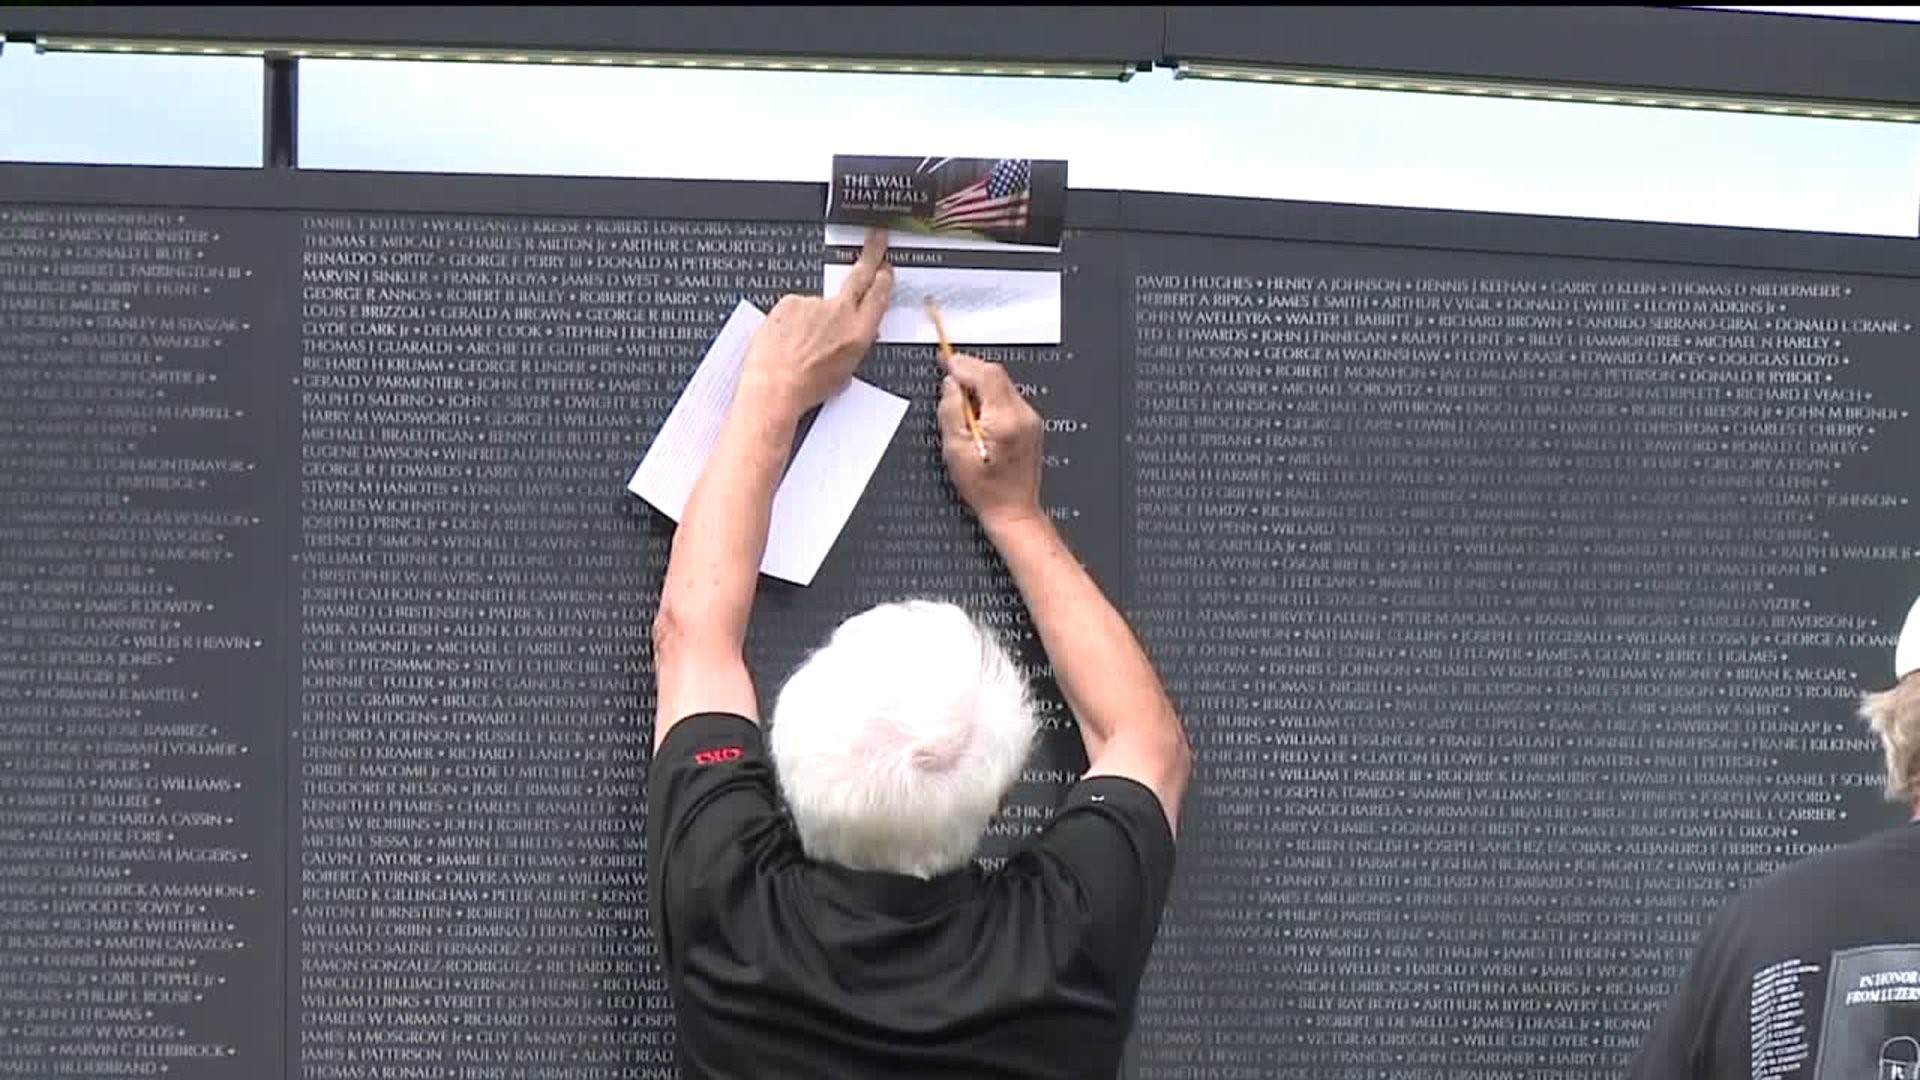 The Wall That Heals Hits Close to Home in Plymouth